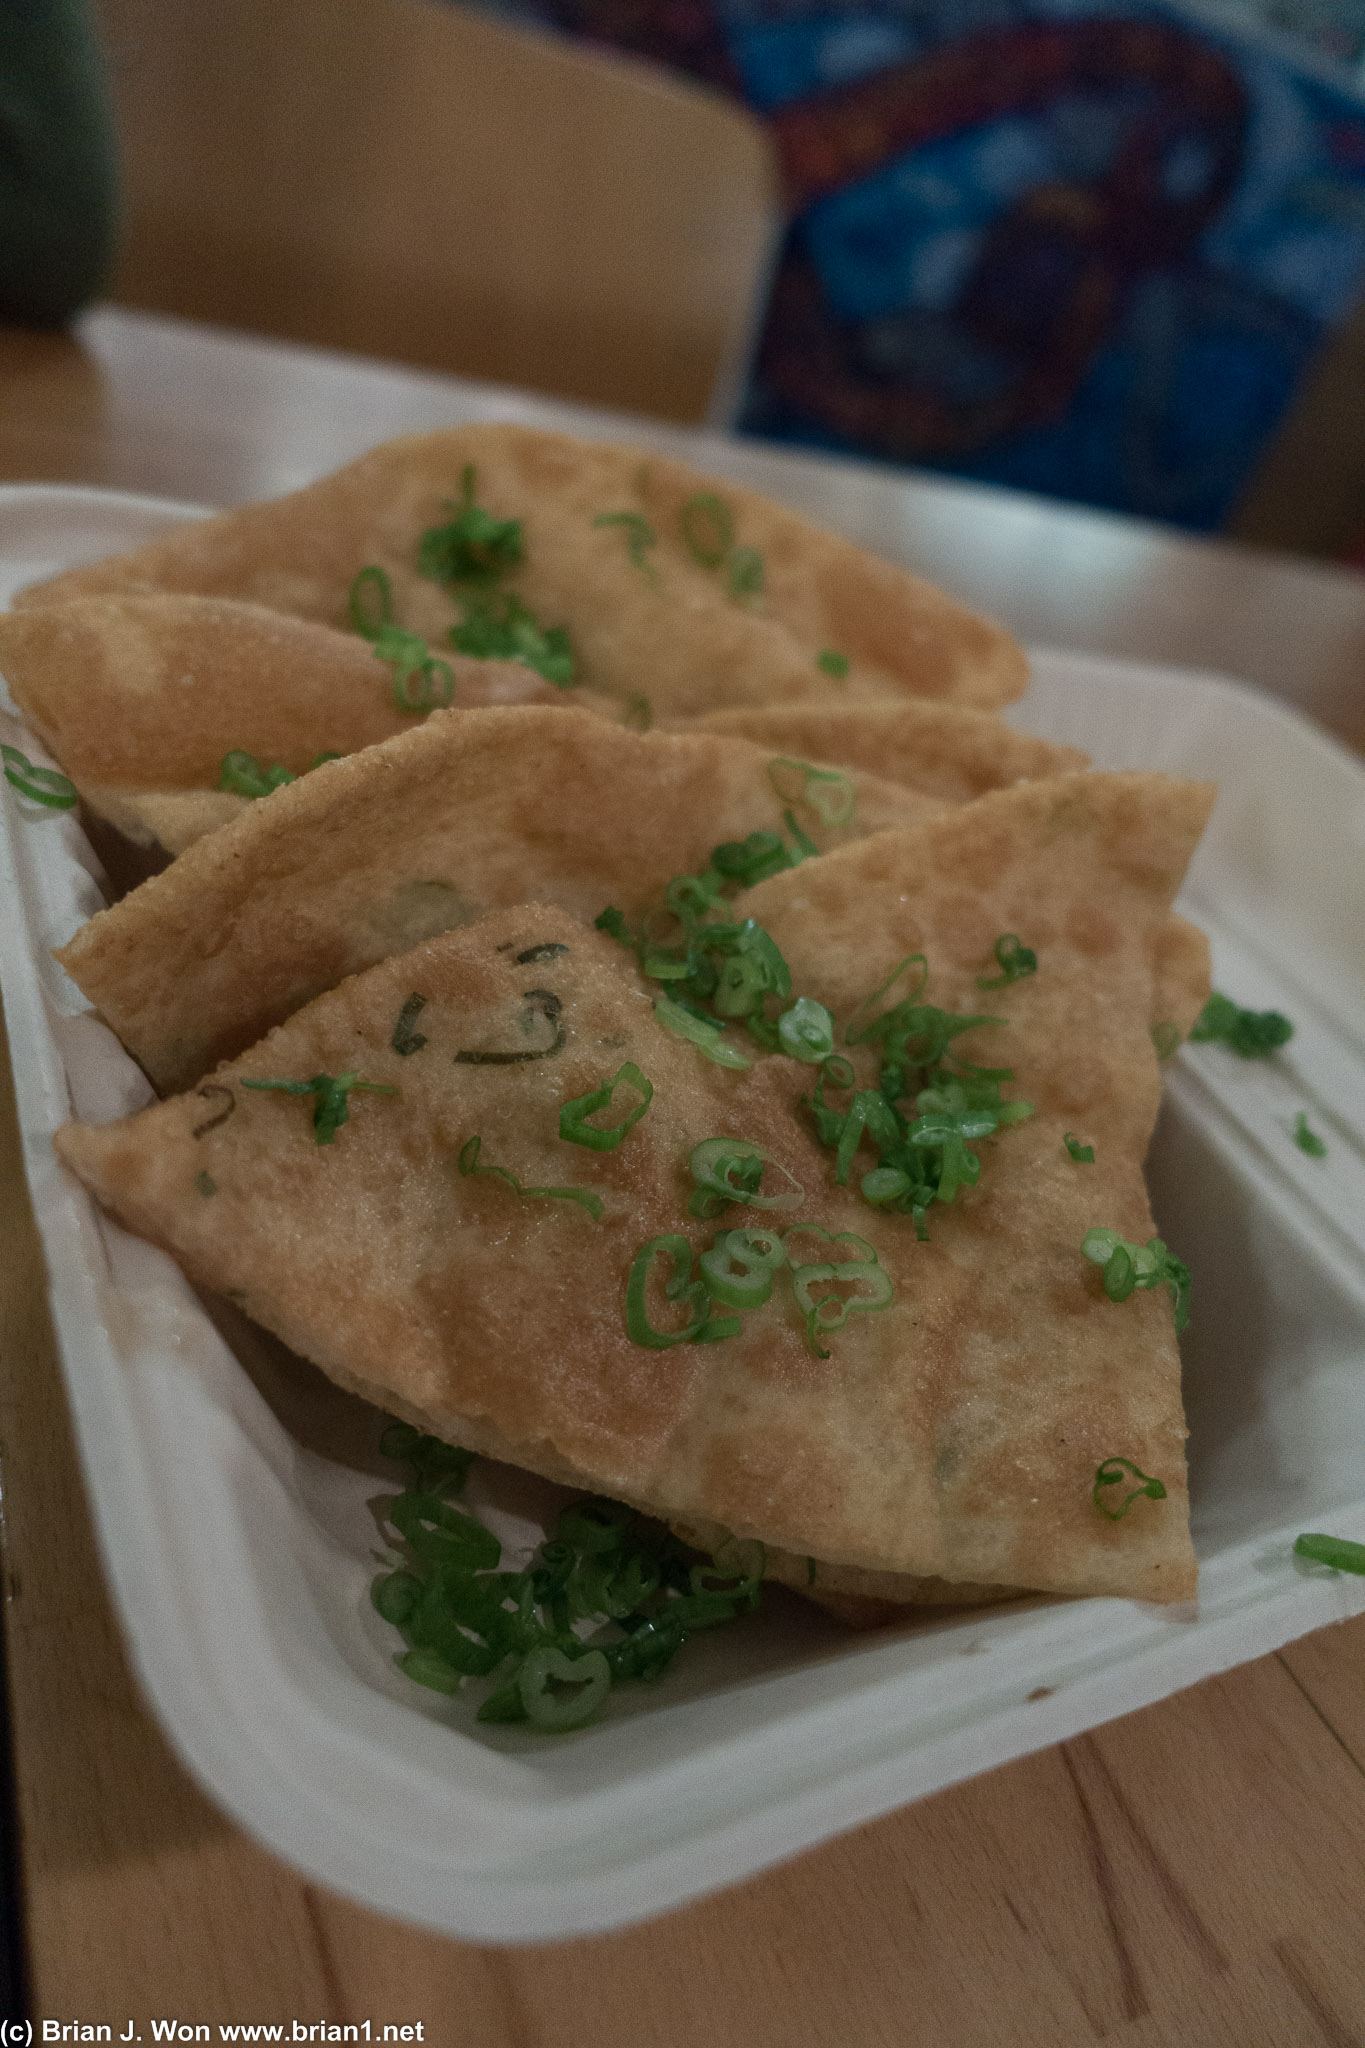 Scallion pancake. Perfectly fried but basically no taste. Scallions in the batter please the next time?